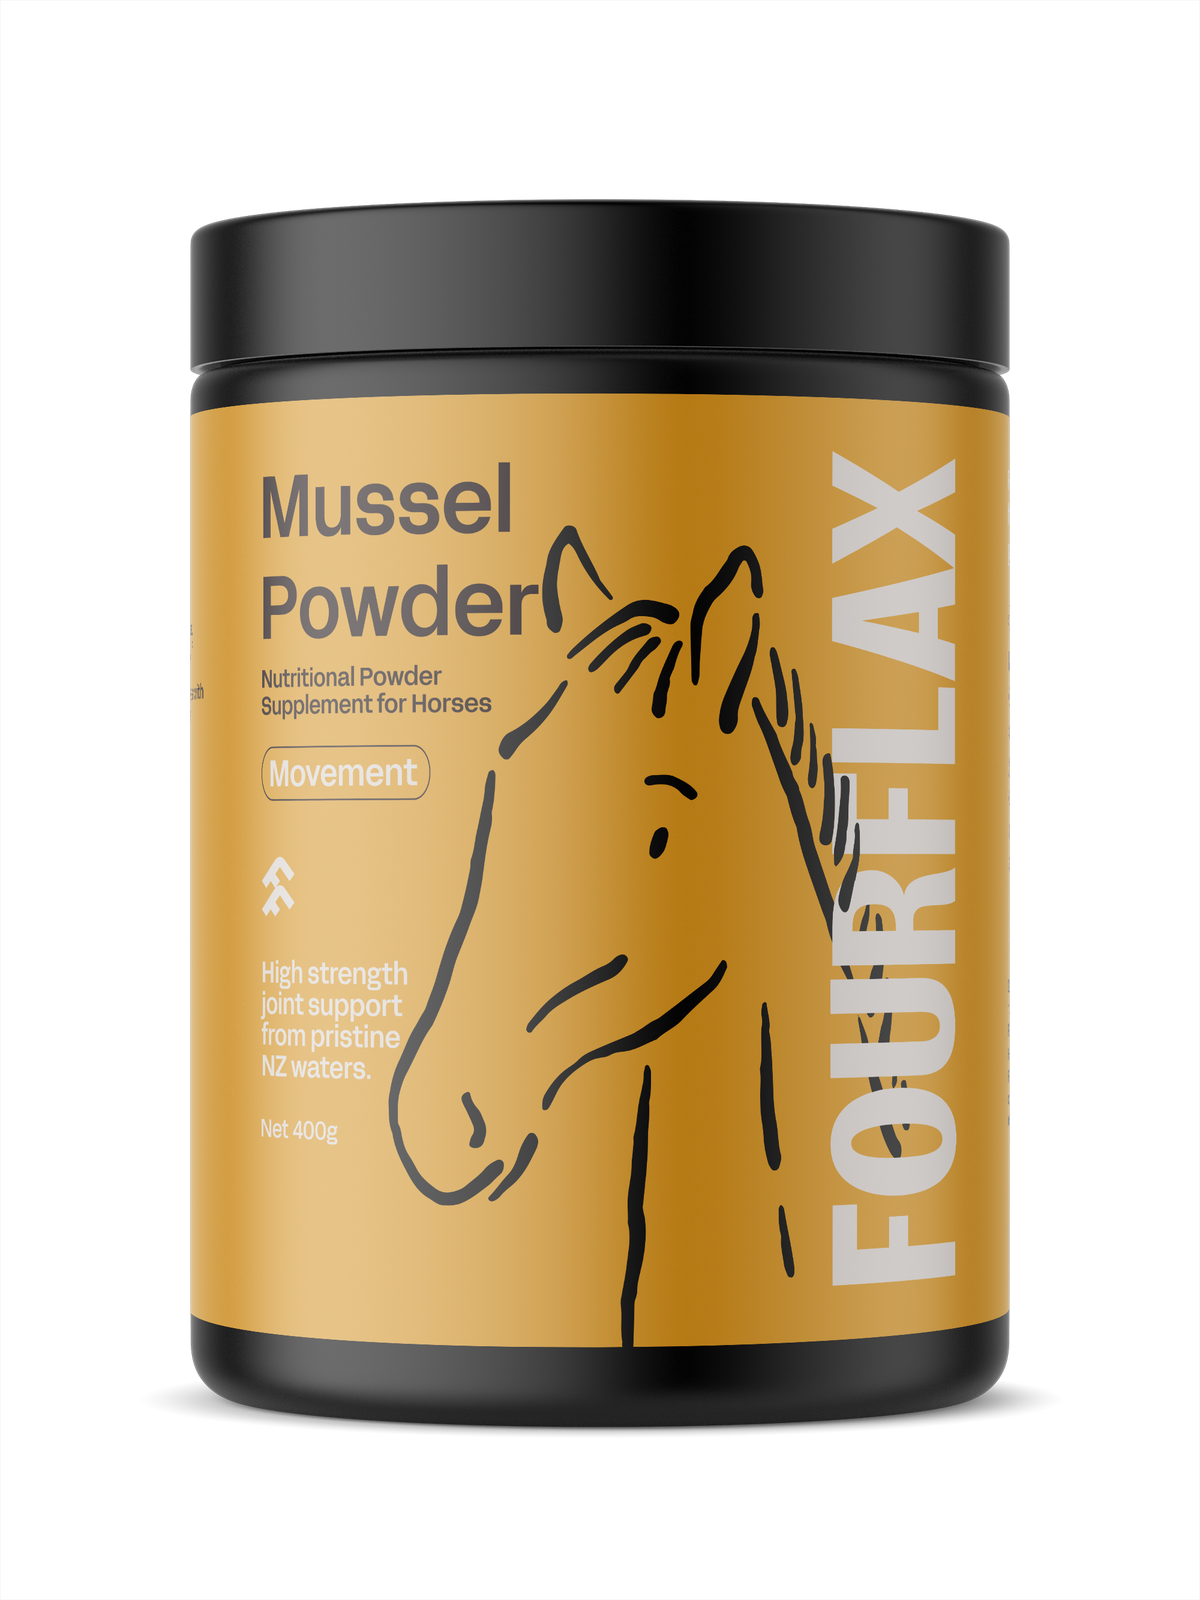 Mussel powder for horses